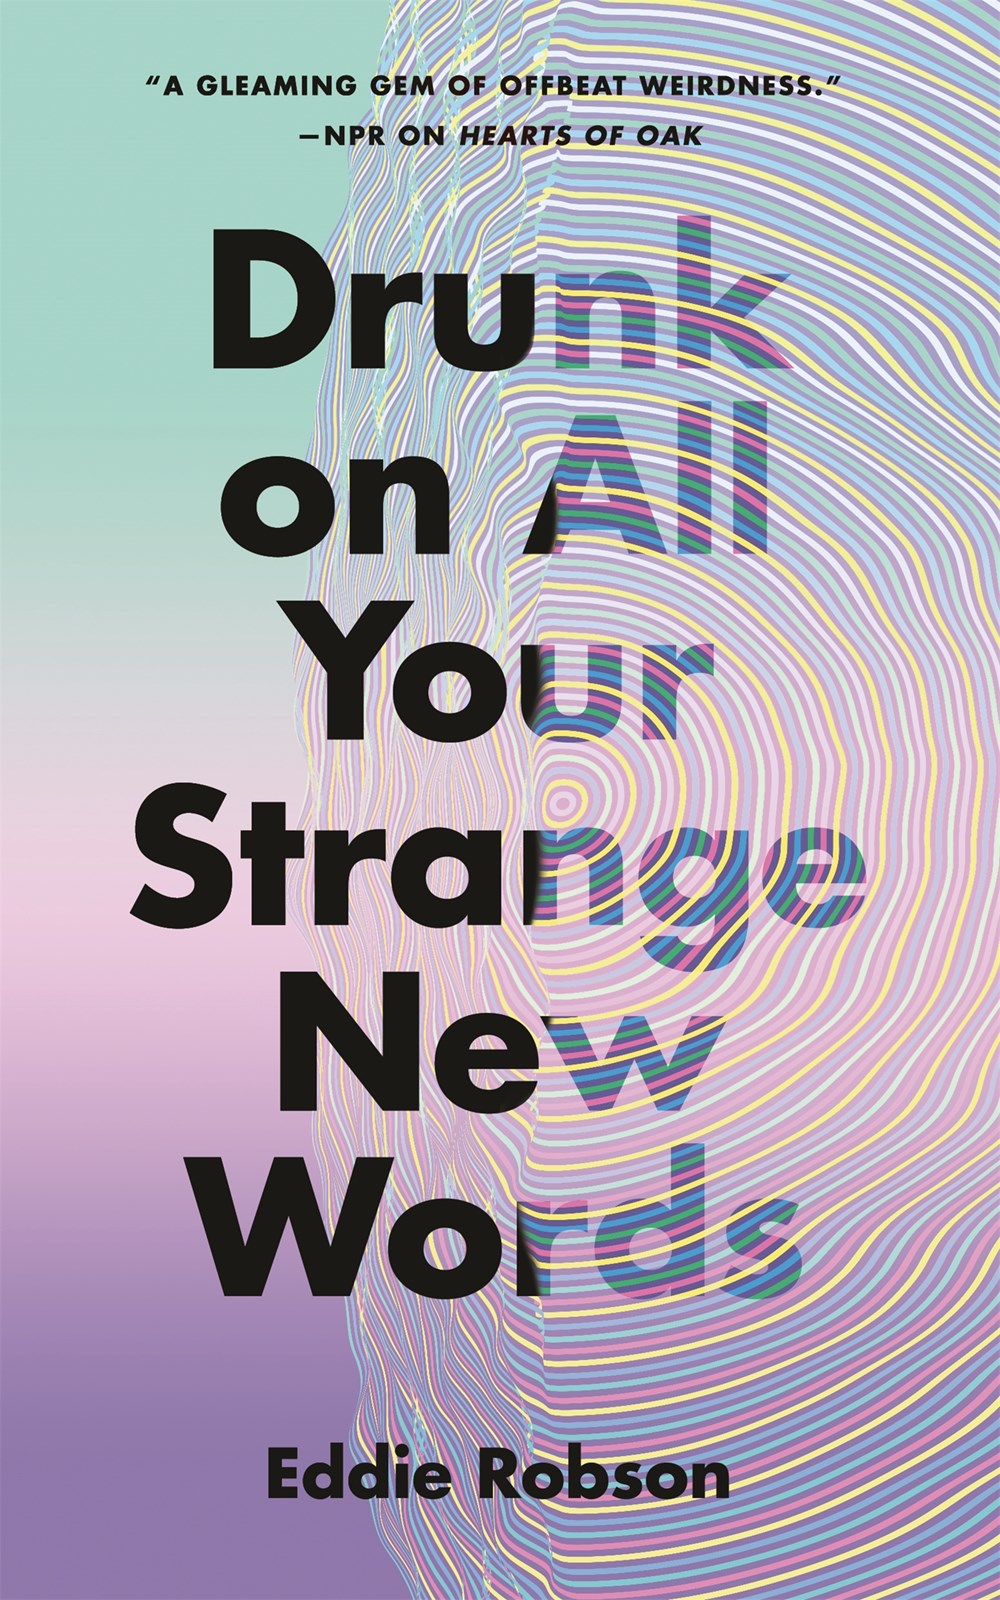 Drunk on All Your Strange New Words cover image